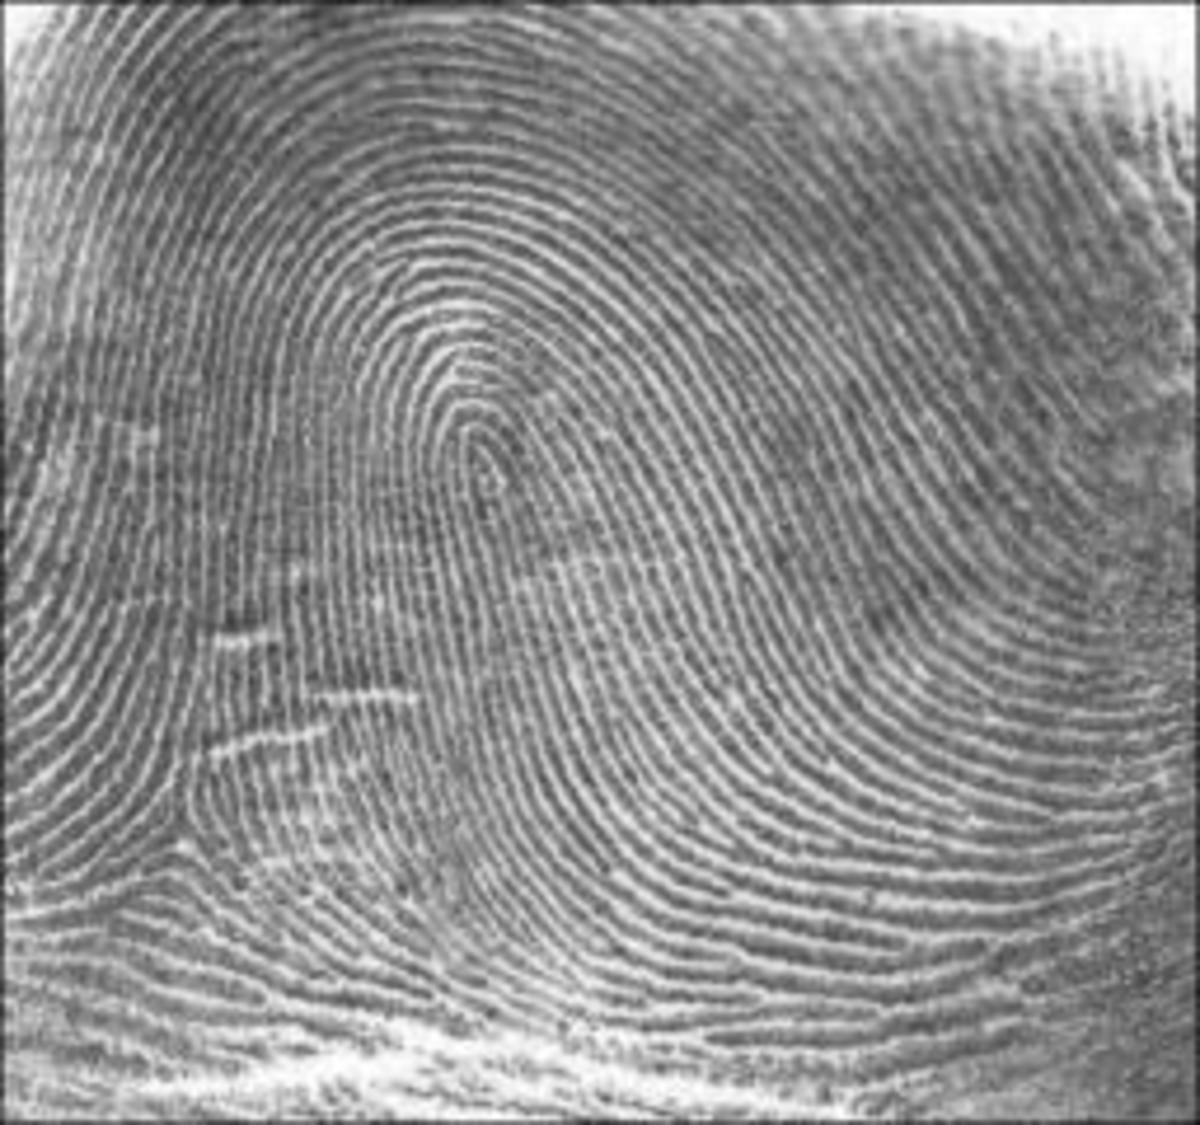 types of fingerprints and what they mean